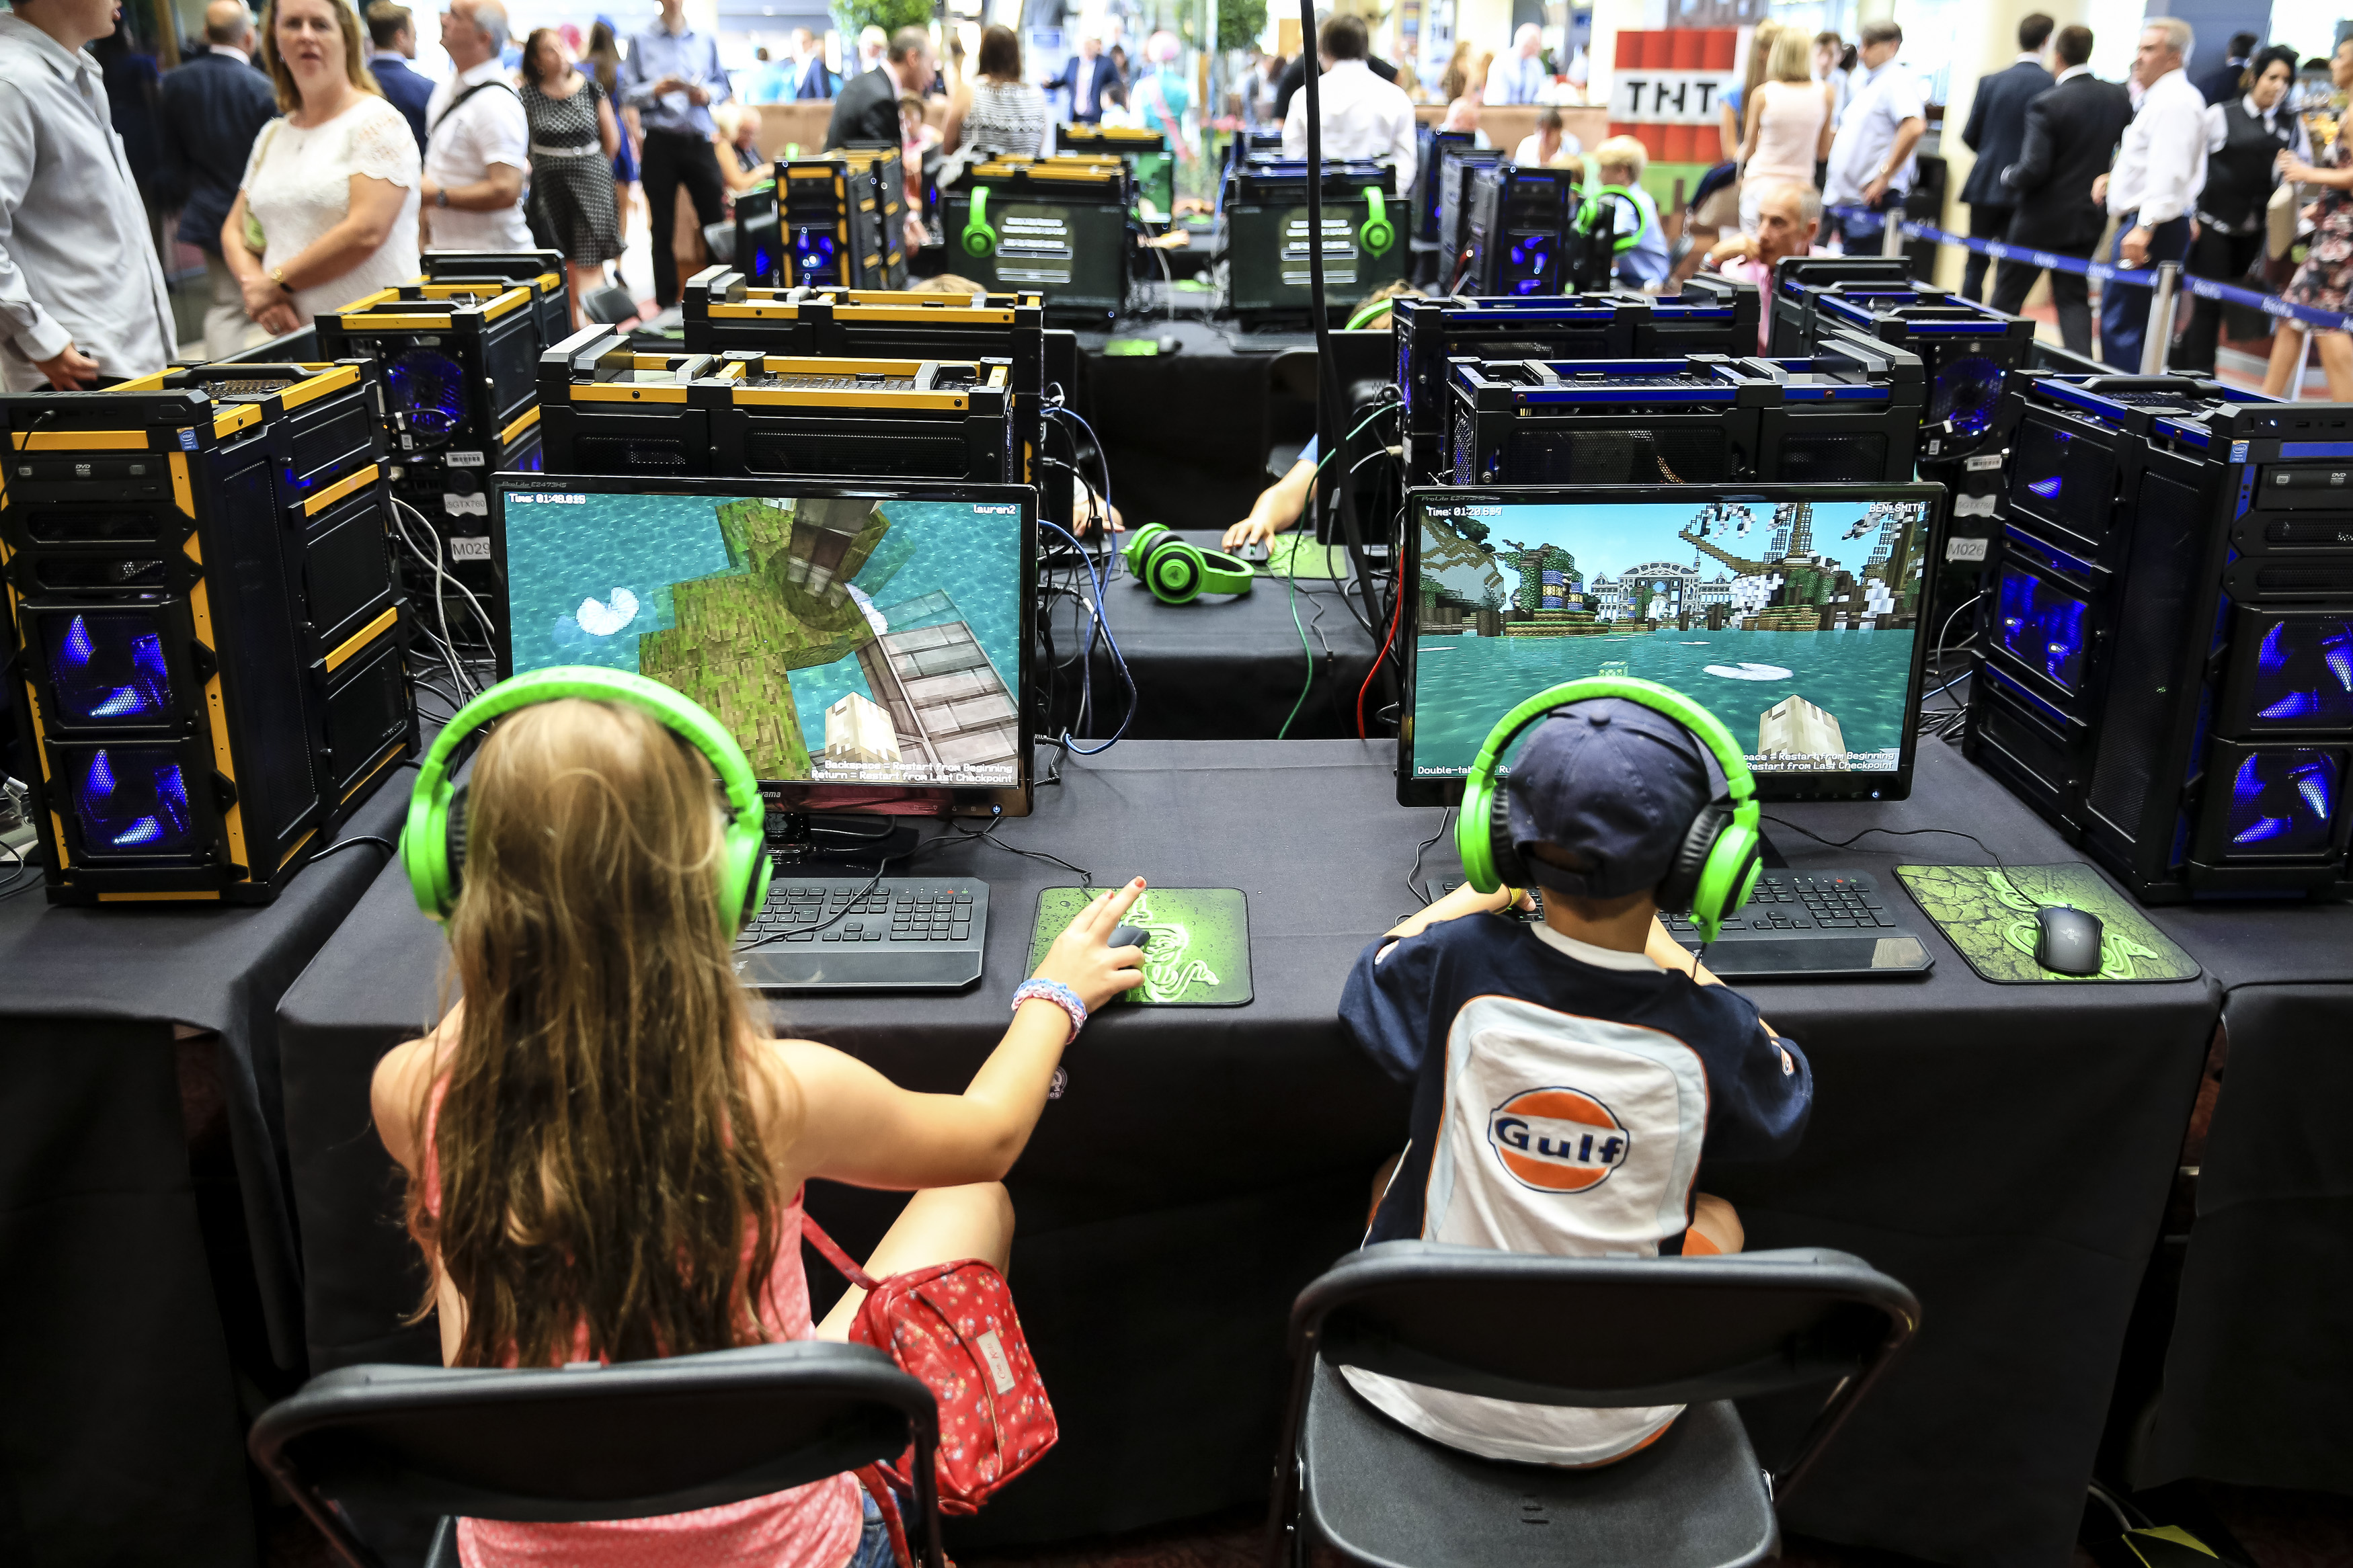 Young racegoers play in a Minecraft tournament during Ascot Dubai Duty Free Shergar Cup and Concert at Ascot Racecourse on August 9, 2014 in Ascot, England. (Miles Willis—Getty Images)